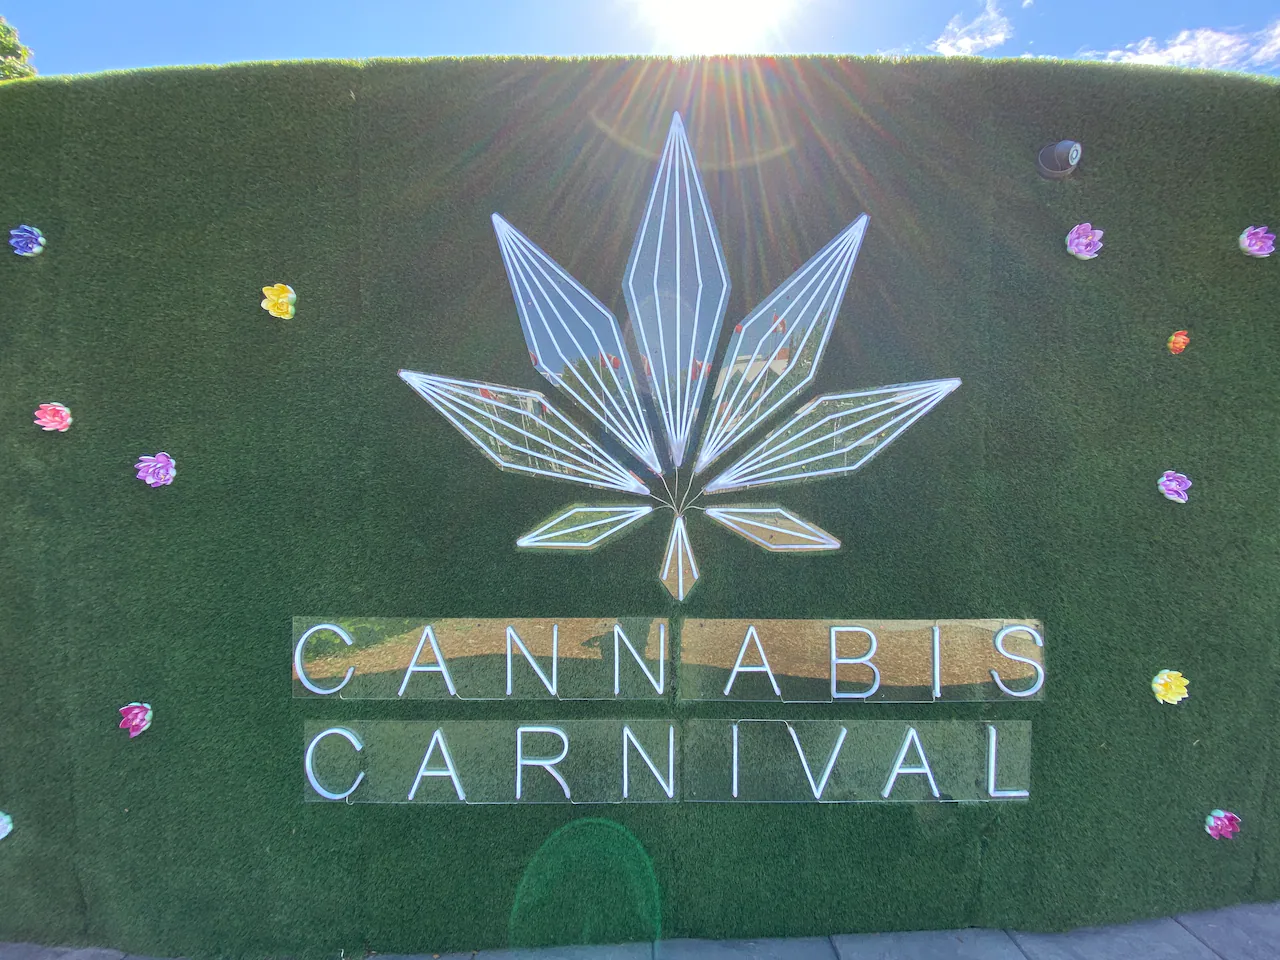 Toronto’s Expo Center Now Features a Built-In Weed Sesh Spot